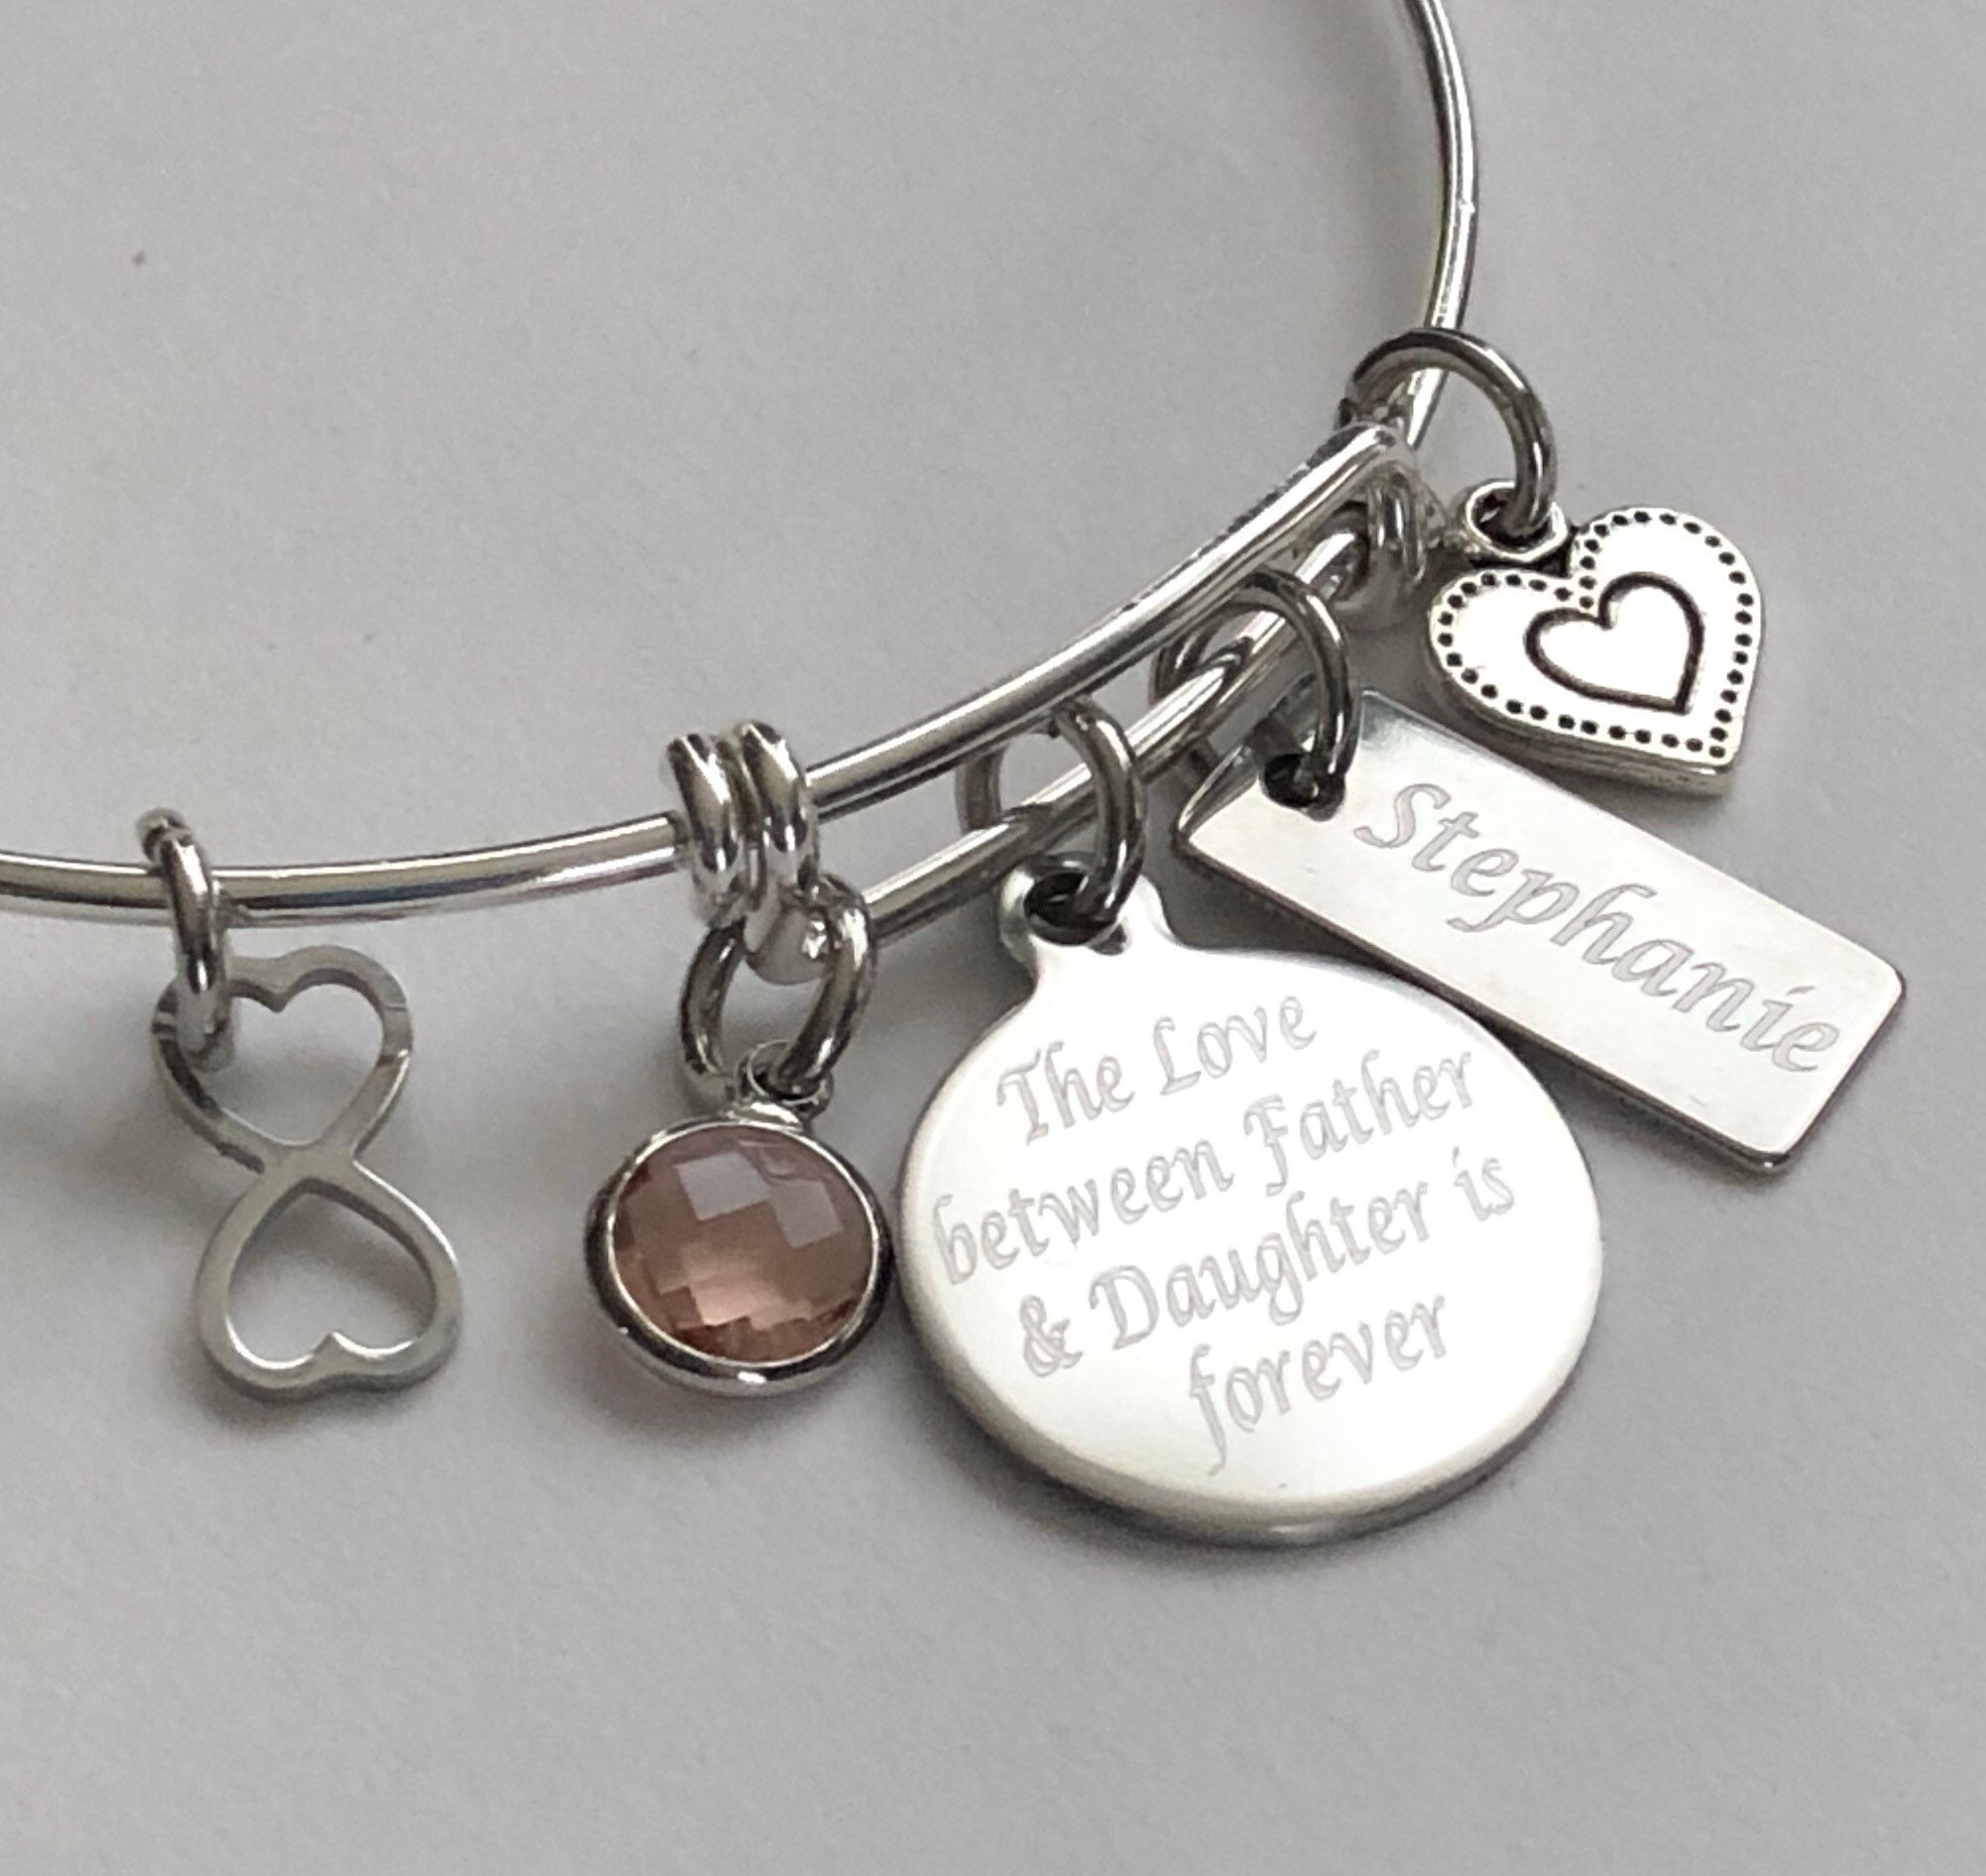 Niece bracelet-personalized #1 Niece stainless steel charm banglegreat for stacking and layering